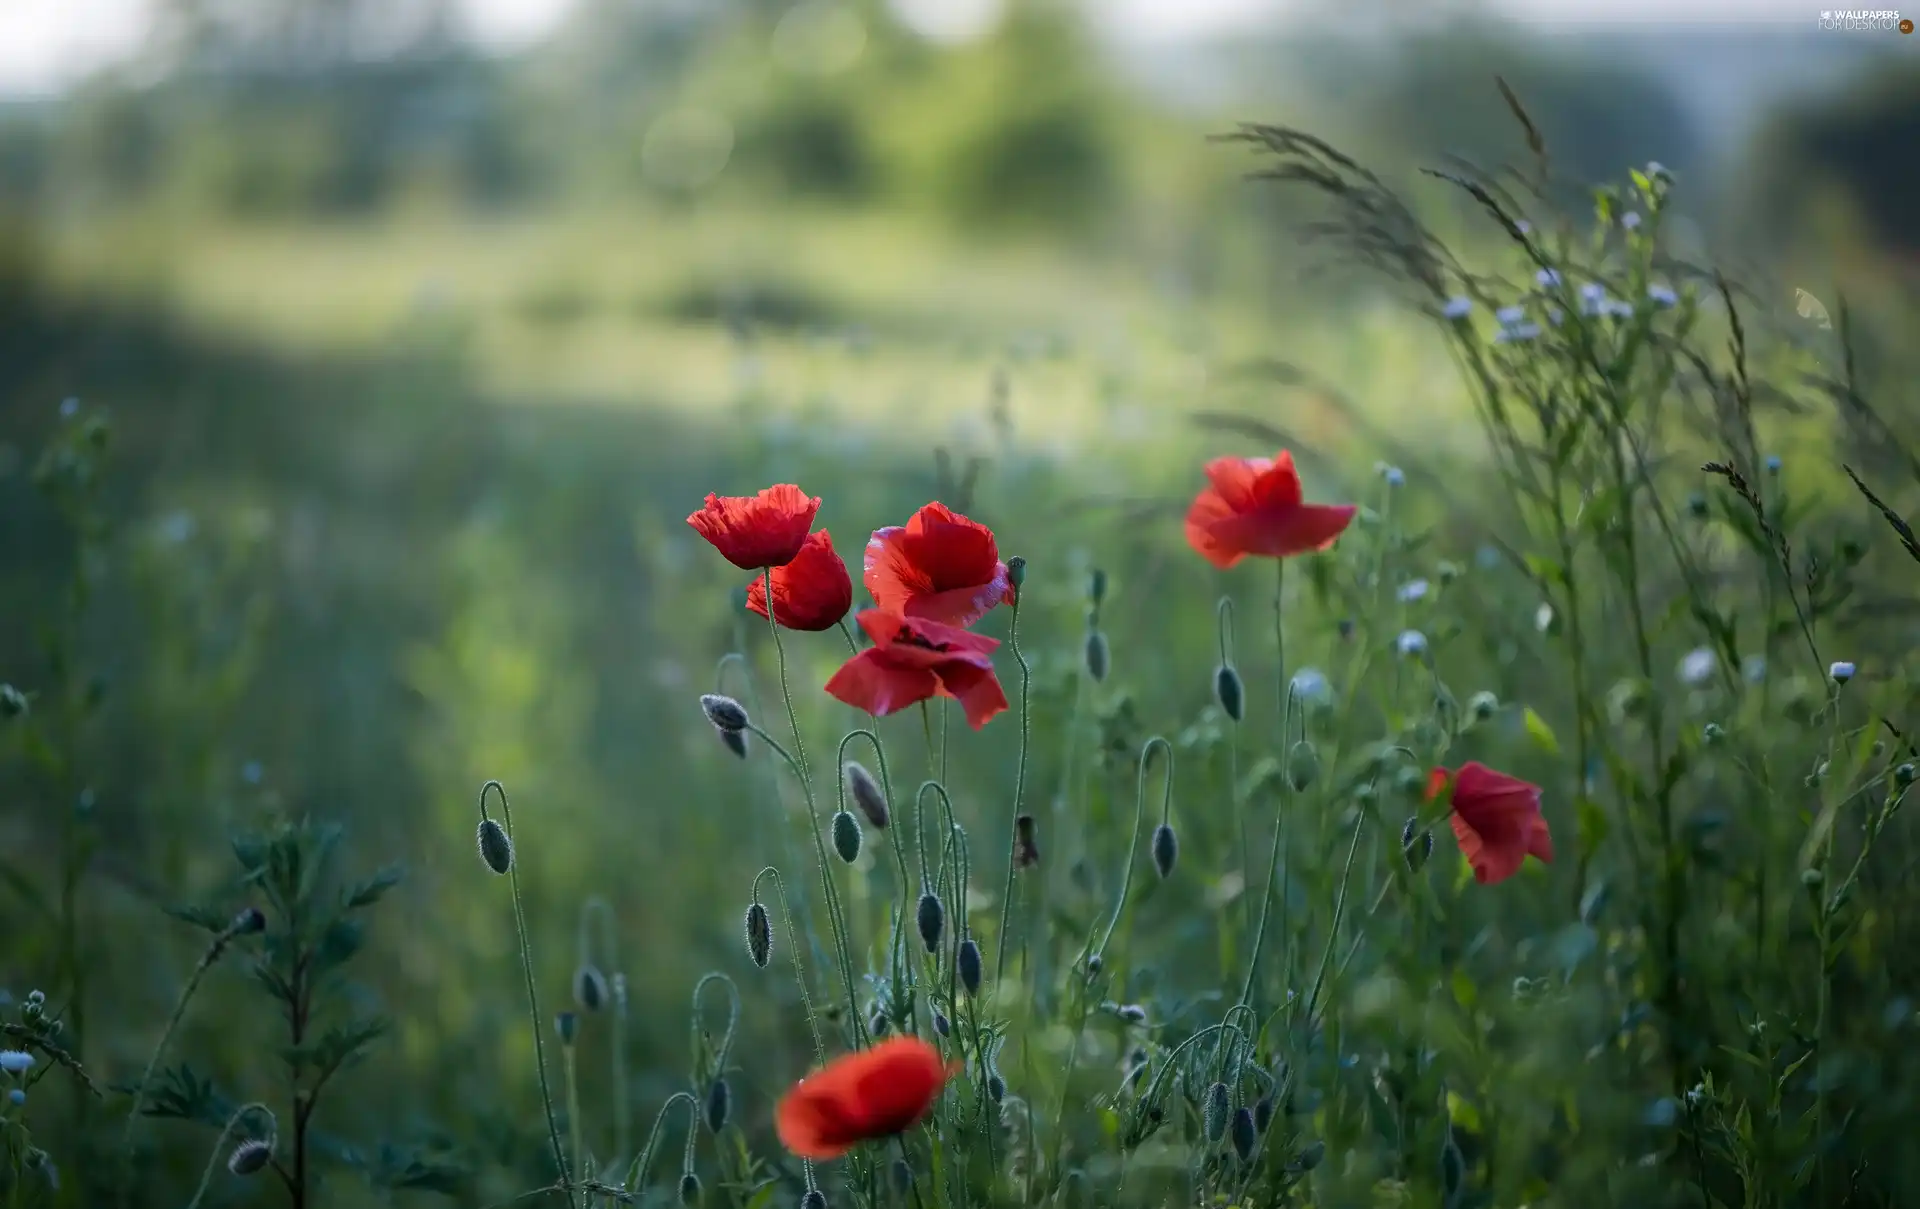 Meadow, blurry background, papavers, Buds, Flowers